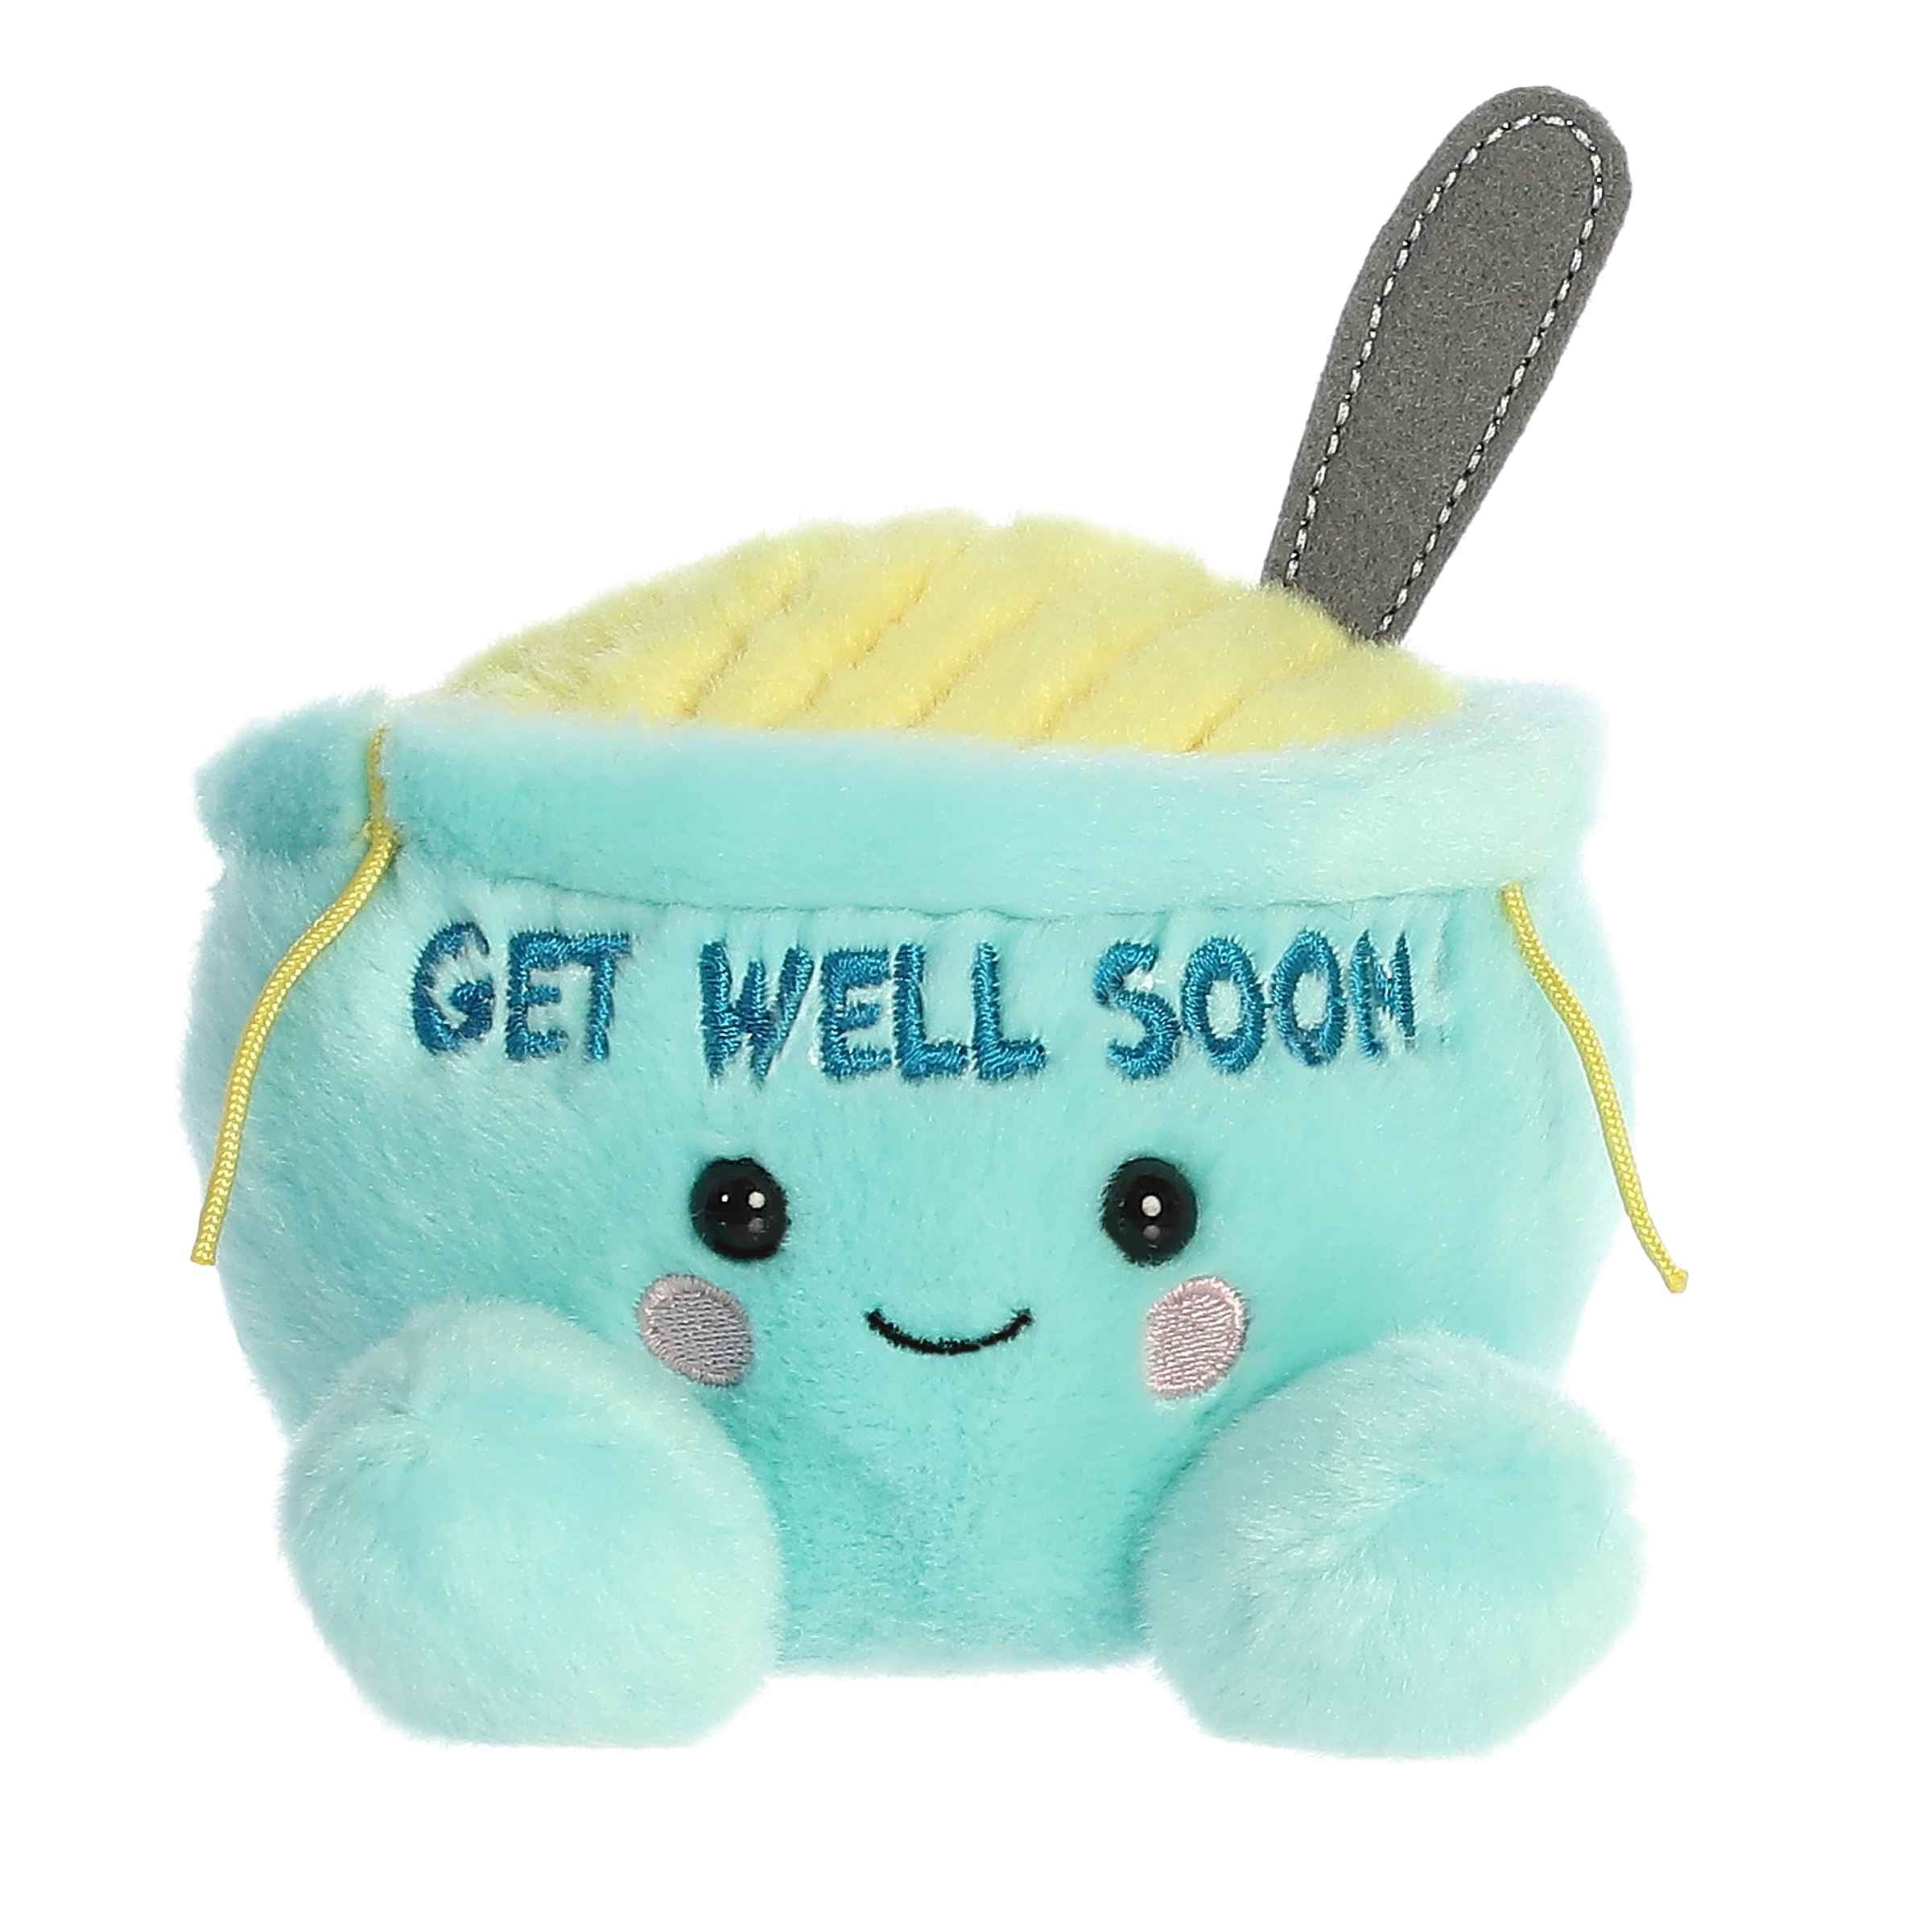 Welly Chicken Soup plush from Palm Pals, with soft yellow broth and 'Get Well Soon' message, comforting